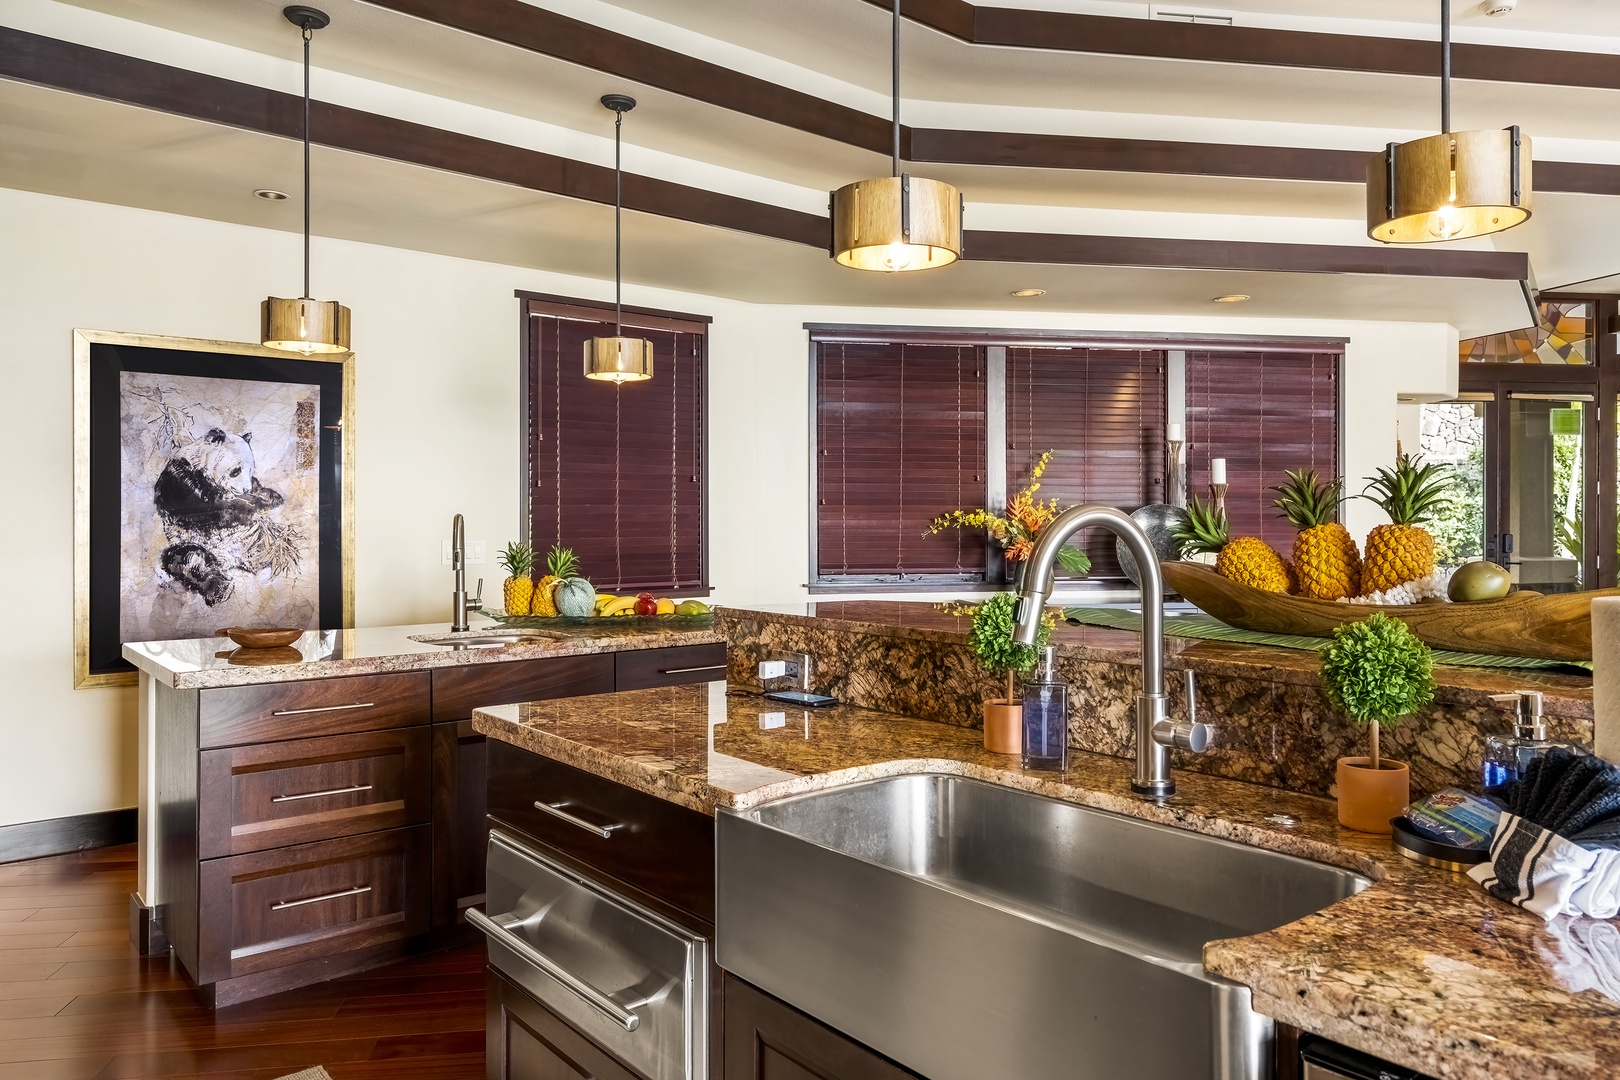 Kailua Kona Vacation Rentals, Island Oasis - Prepare your favorite meals in this fantastic Chef's kitchen